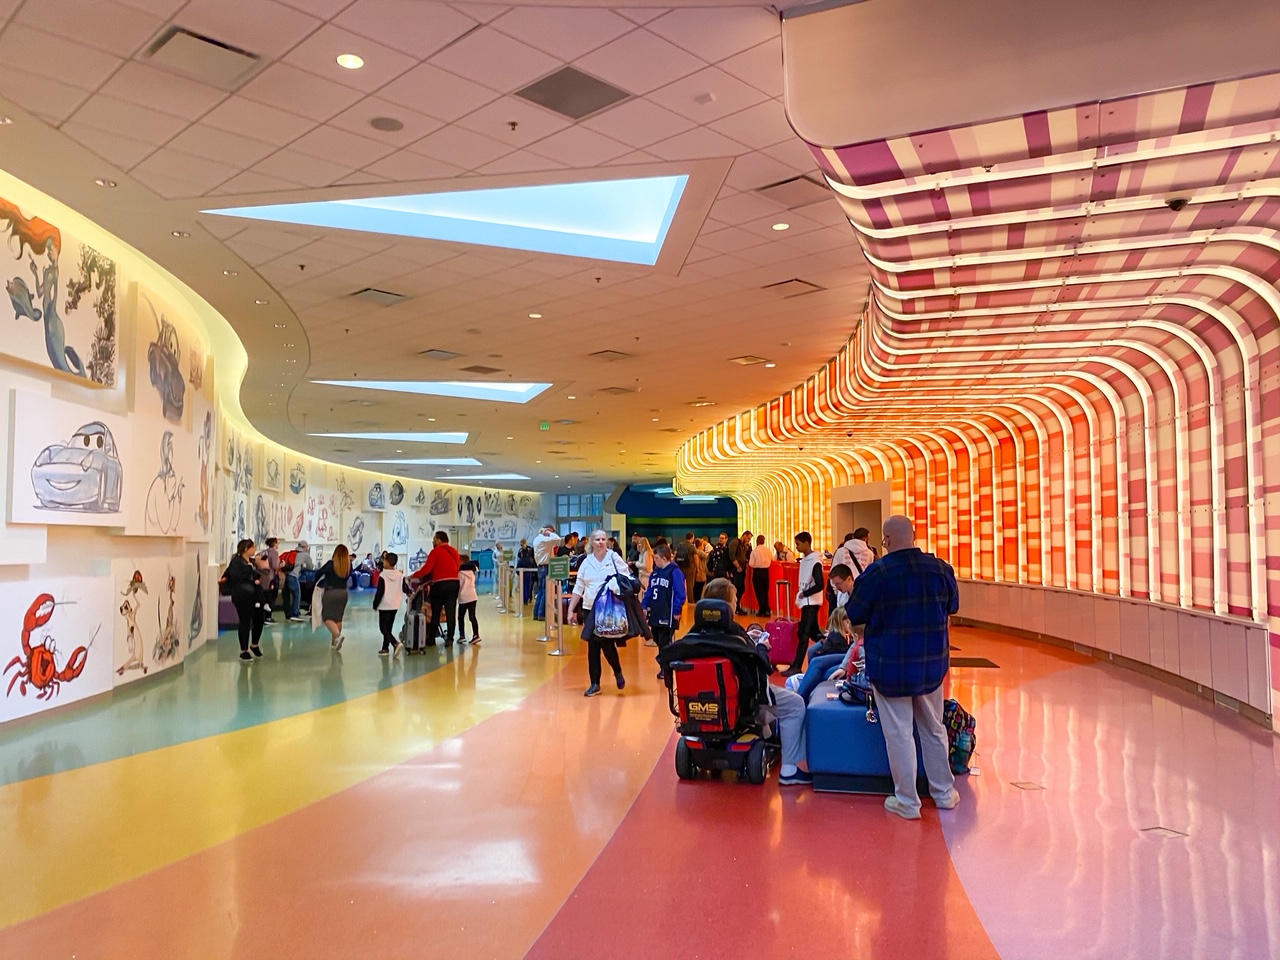 view of the Art of Animation lobby with cartoon drawings on the wall and bright lights